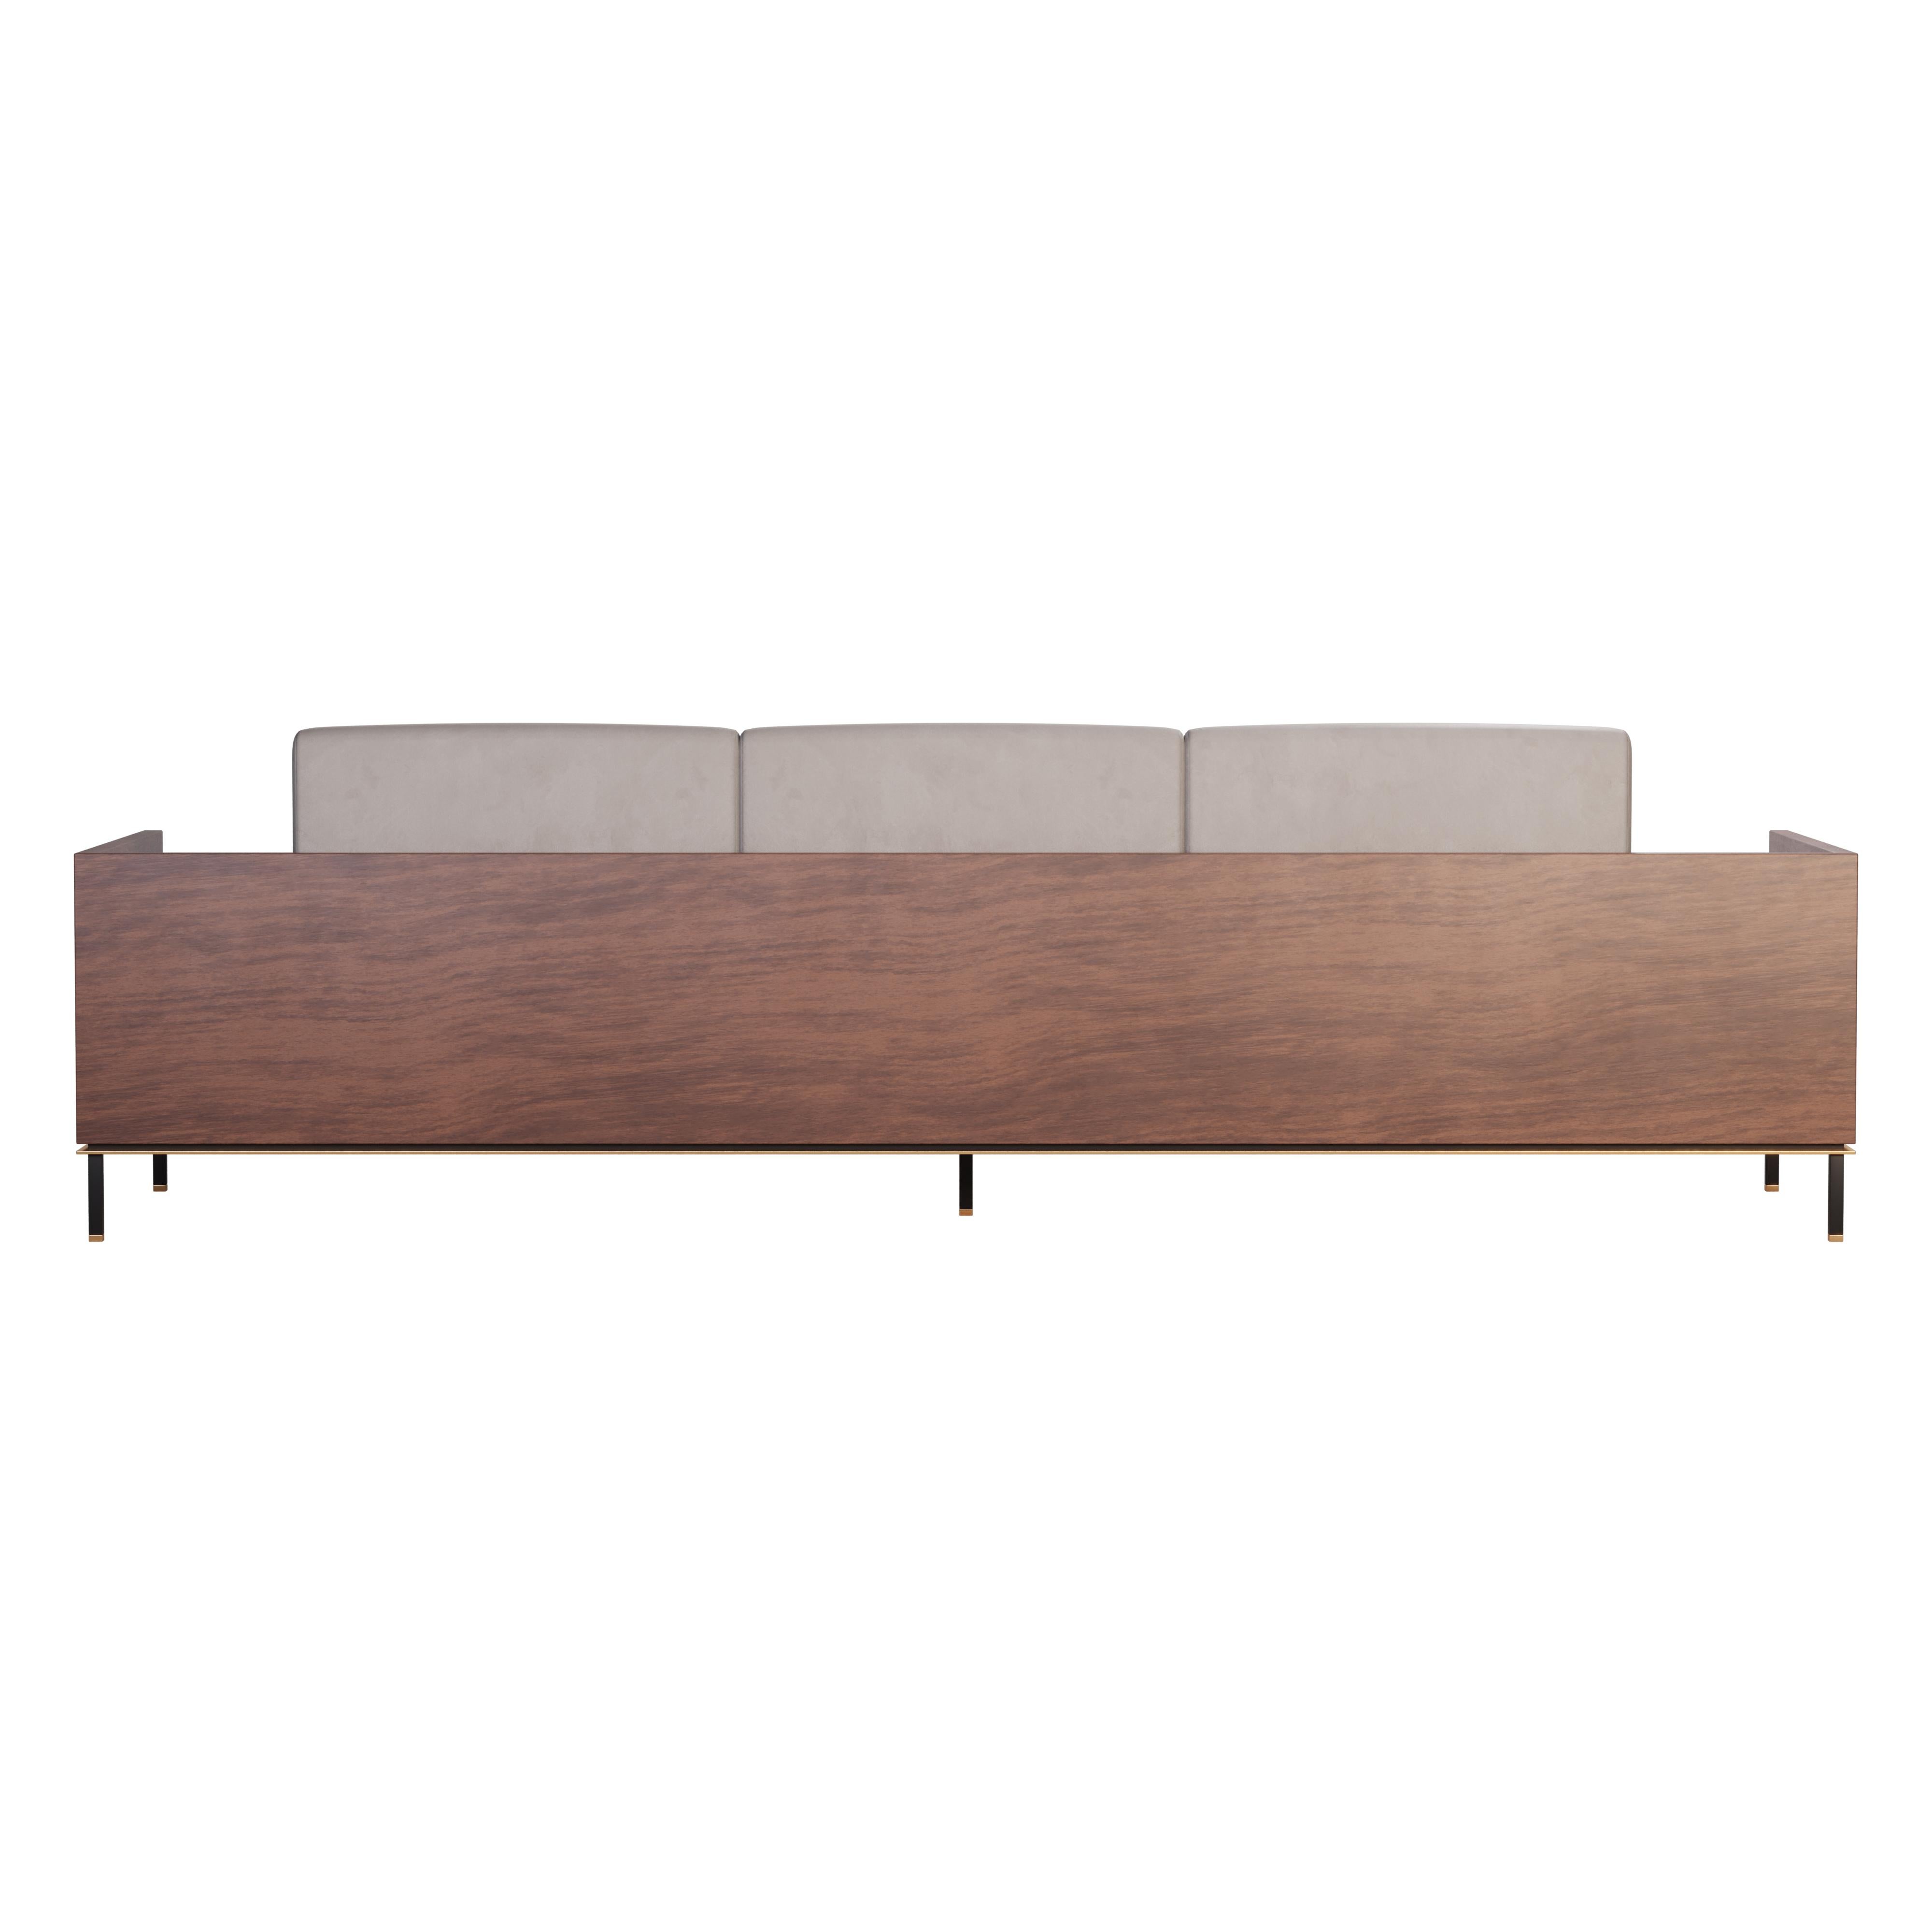 Portuguese 21st century Asheville I Sofa Smoked Walnut Leather Suede Brushed Brass For Sale